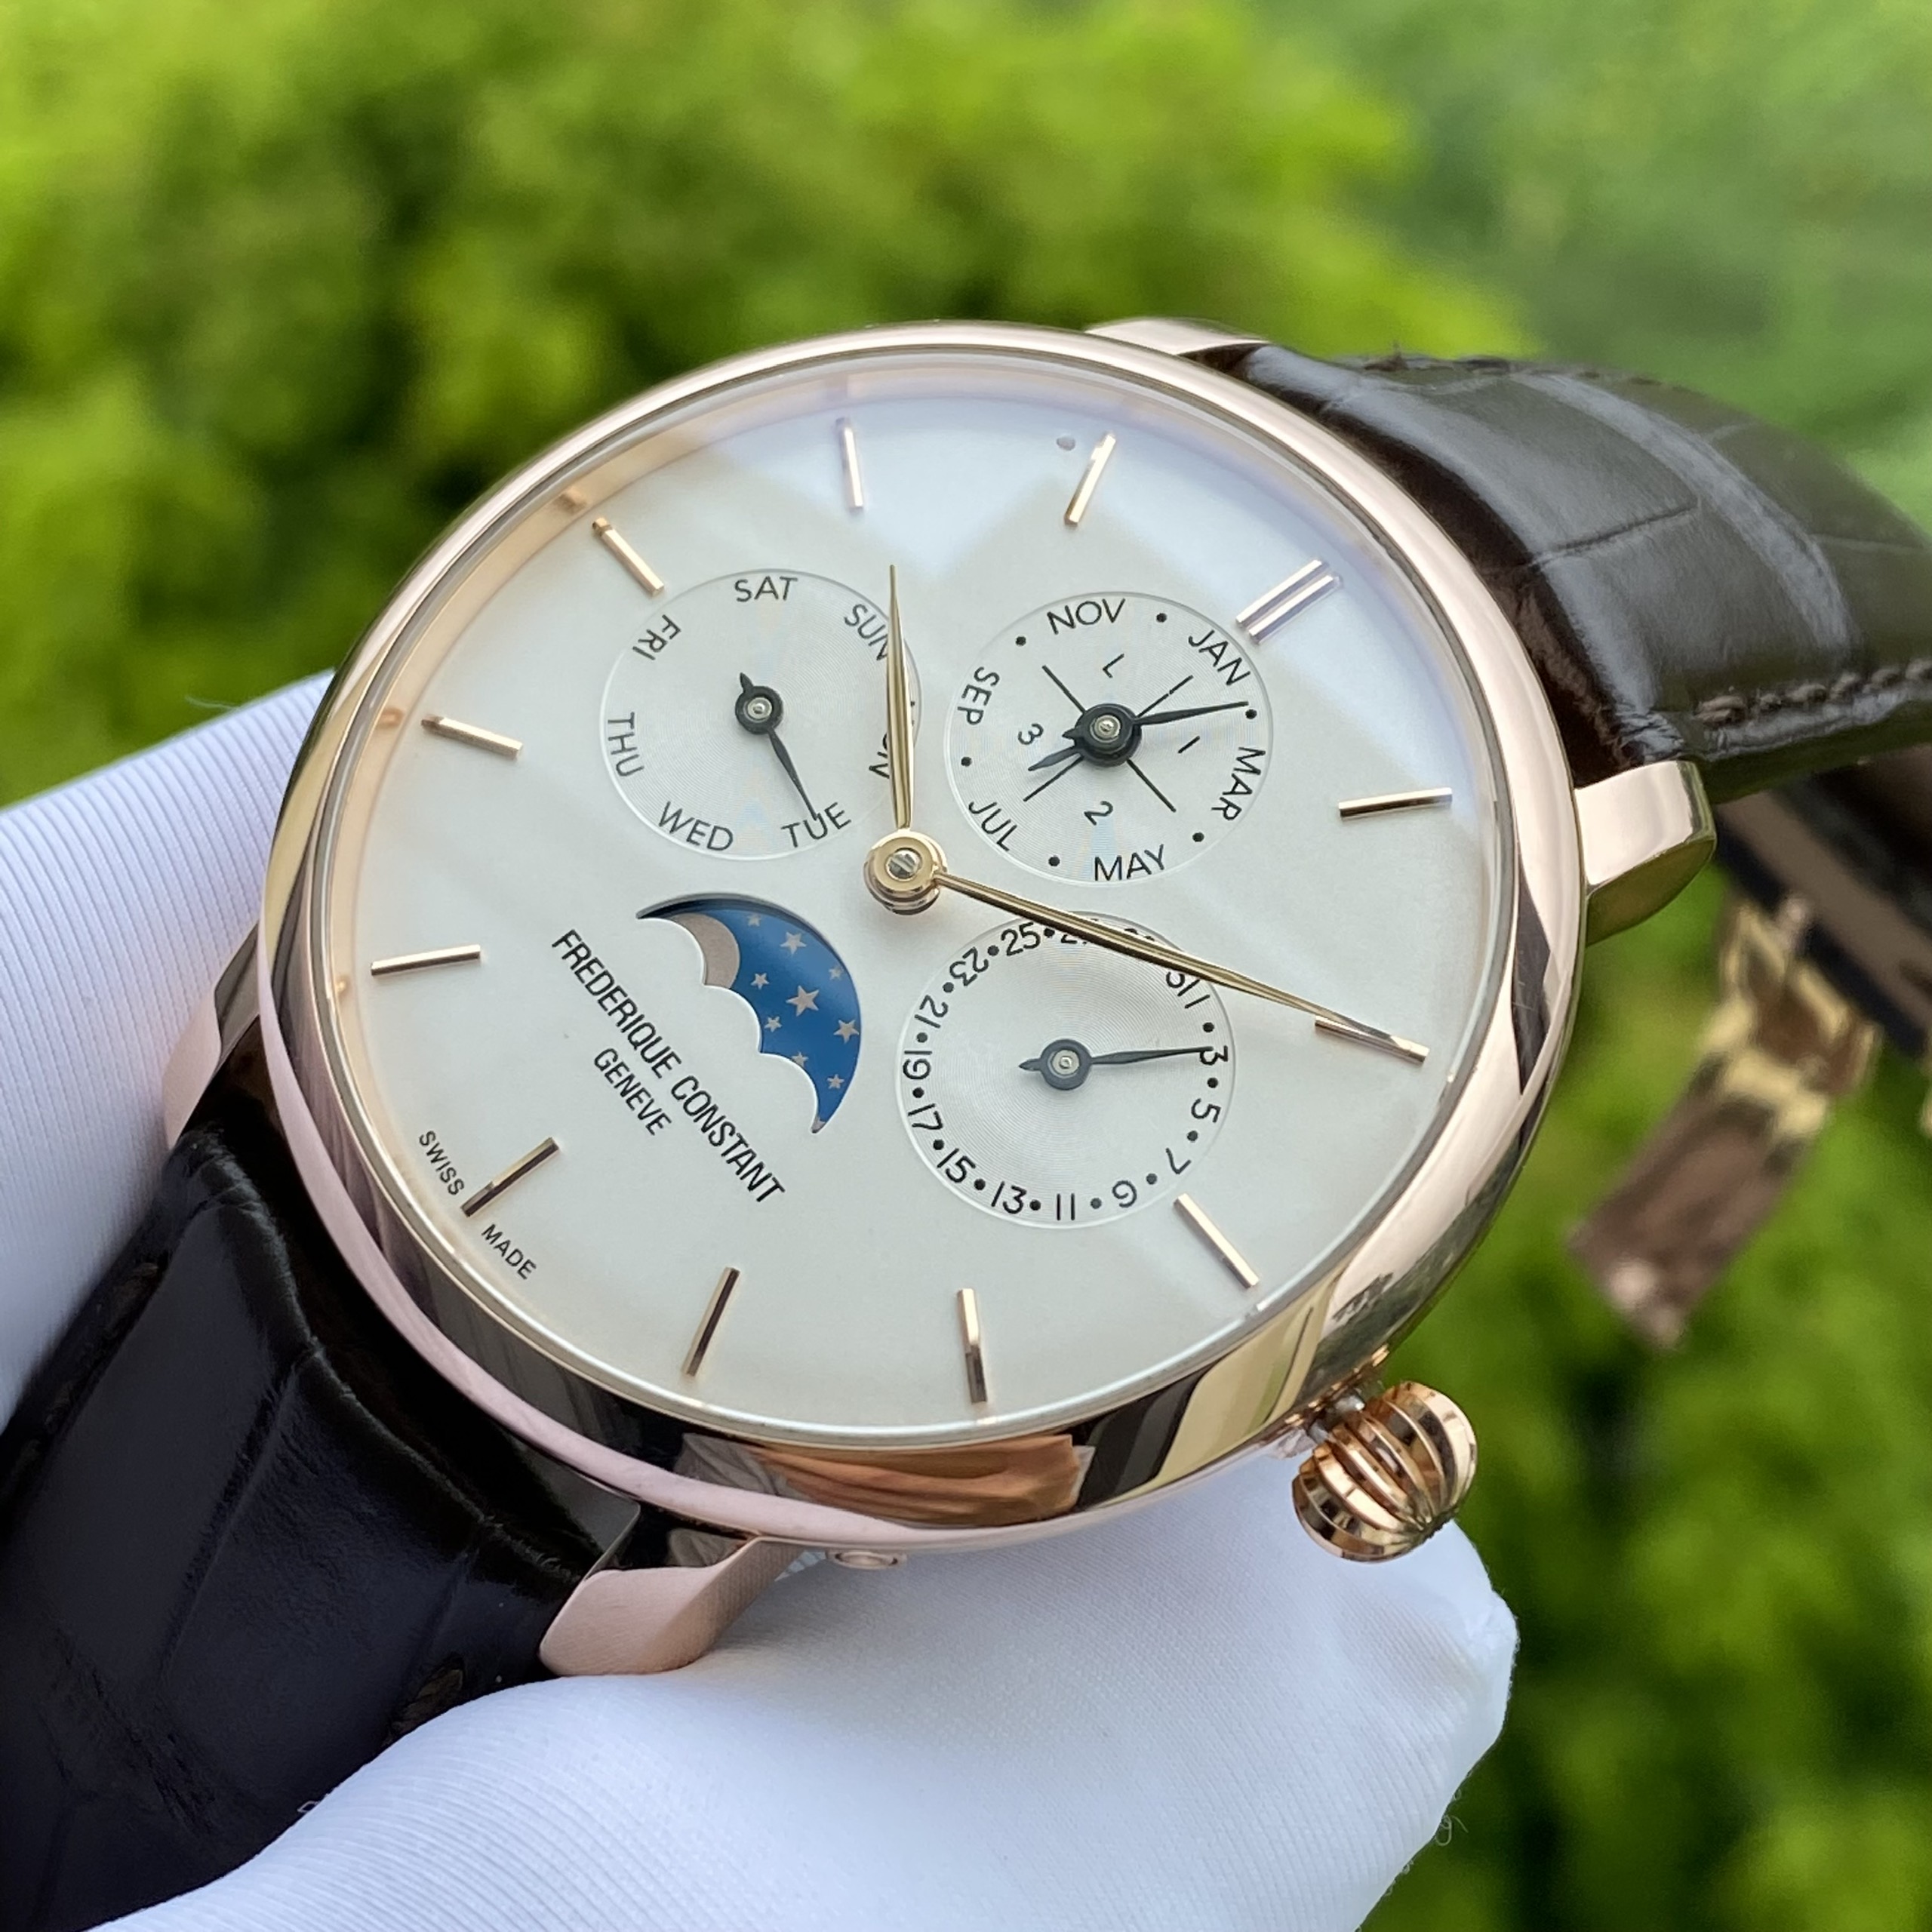 Frederique Constant Perpetual Calender Moonphase FC-775G4S4 FC775G4S4